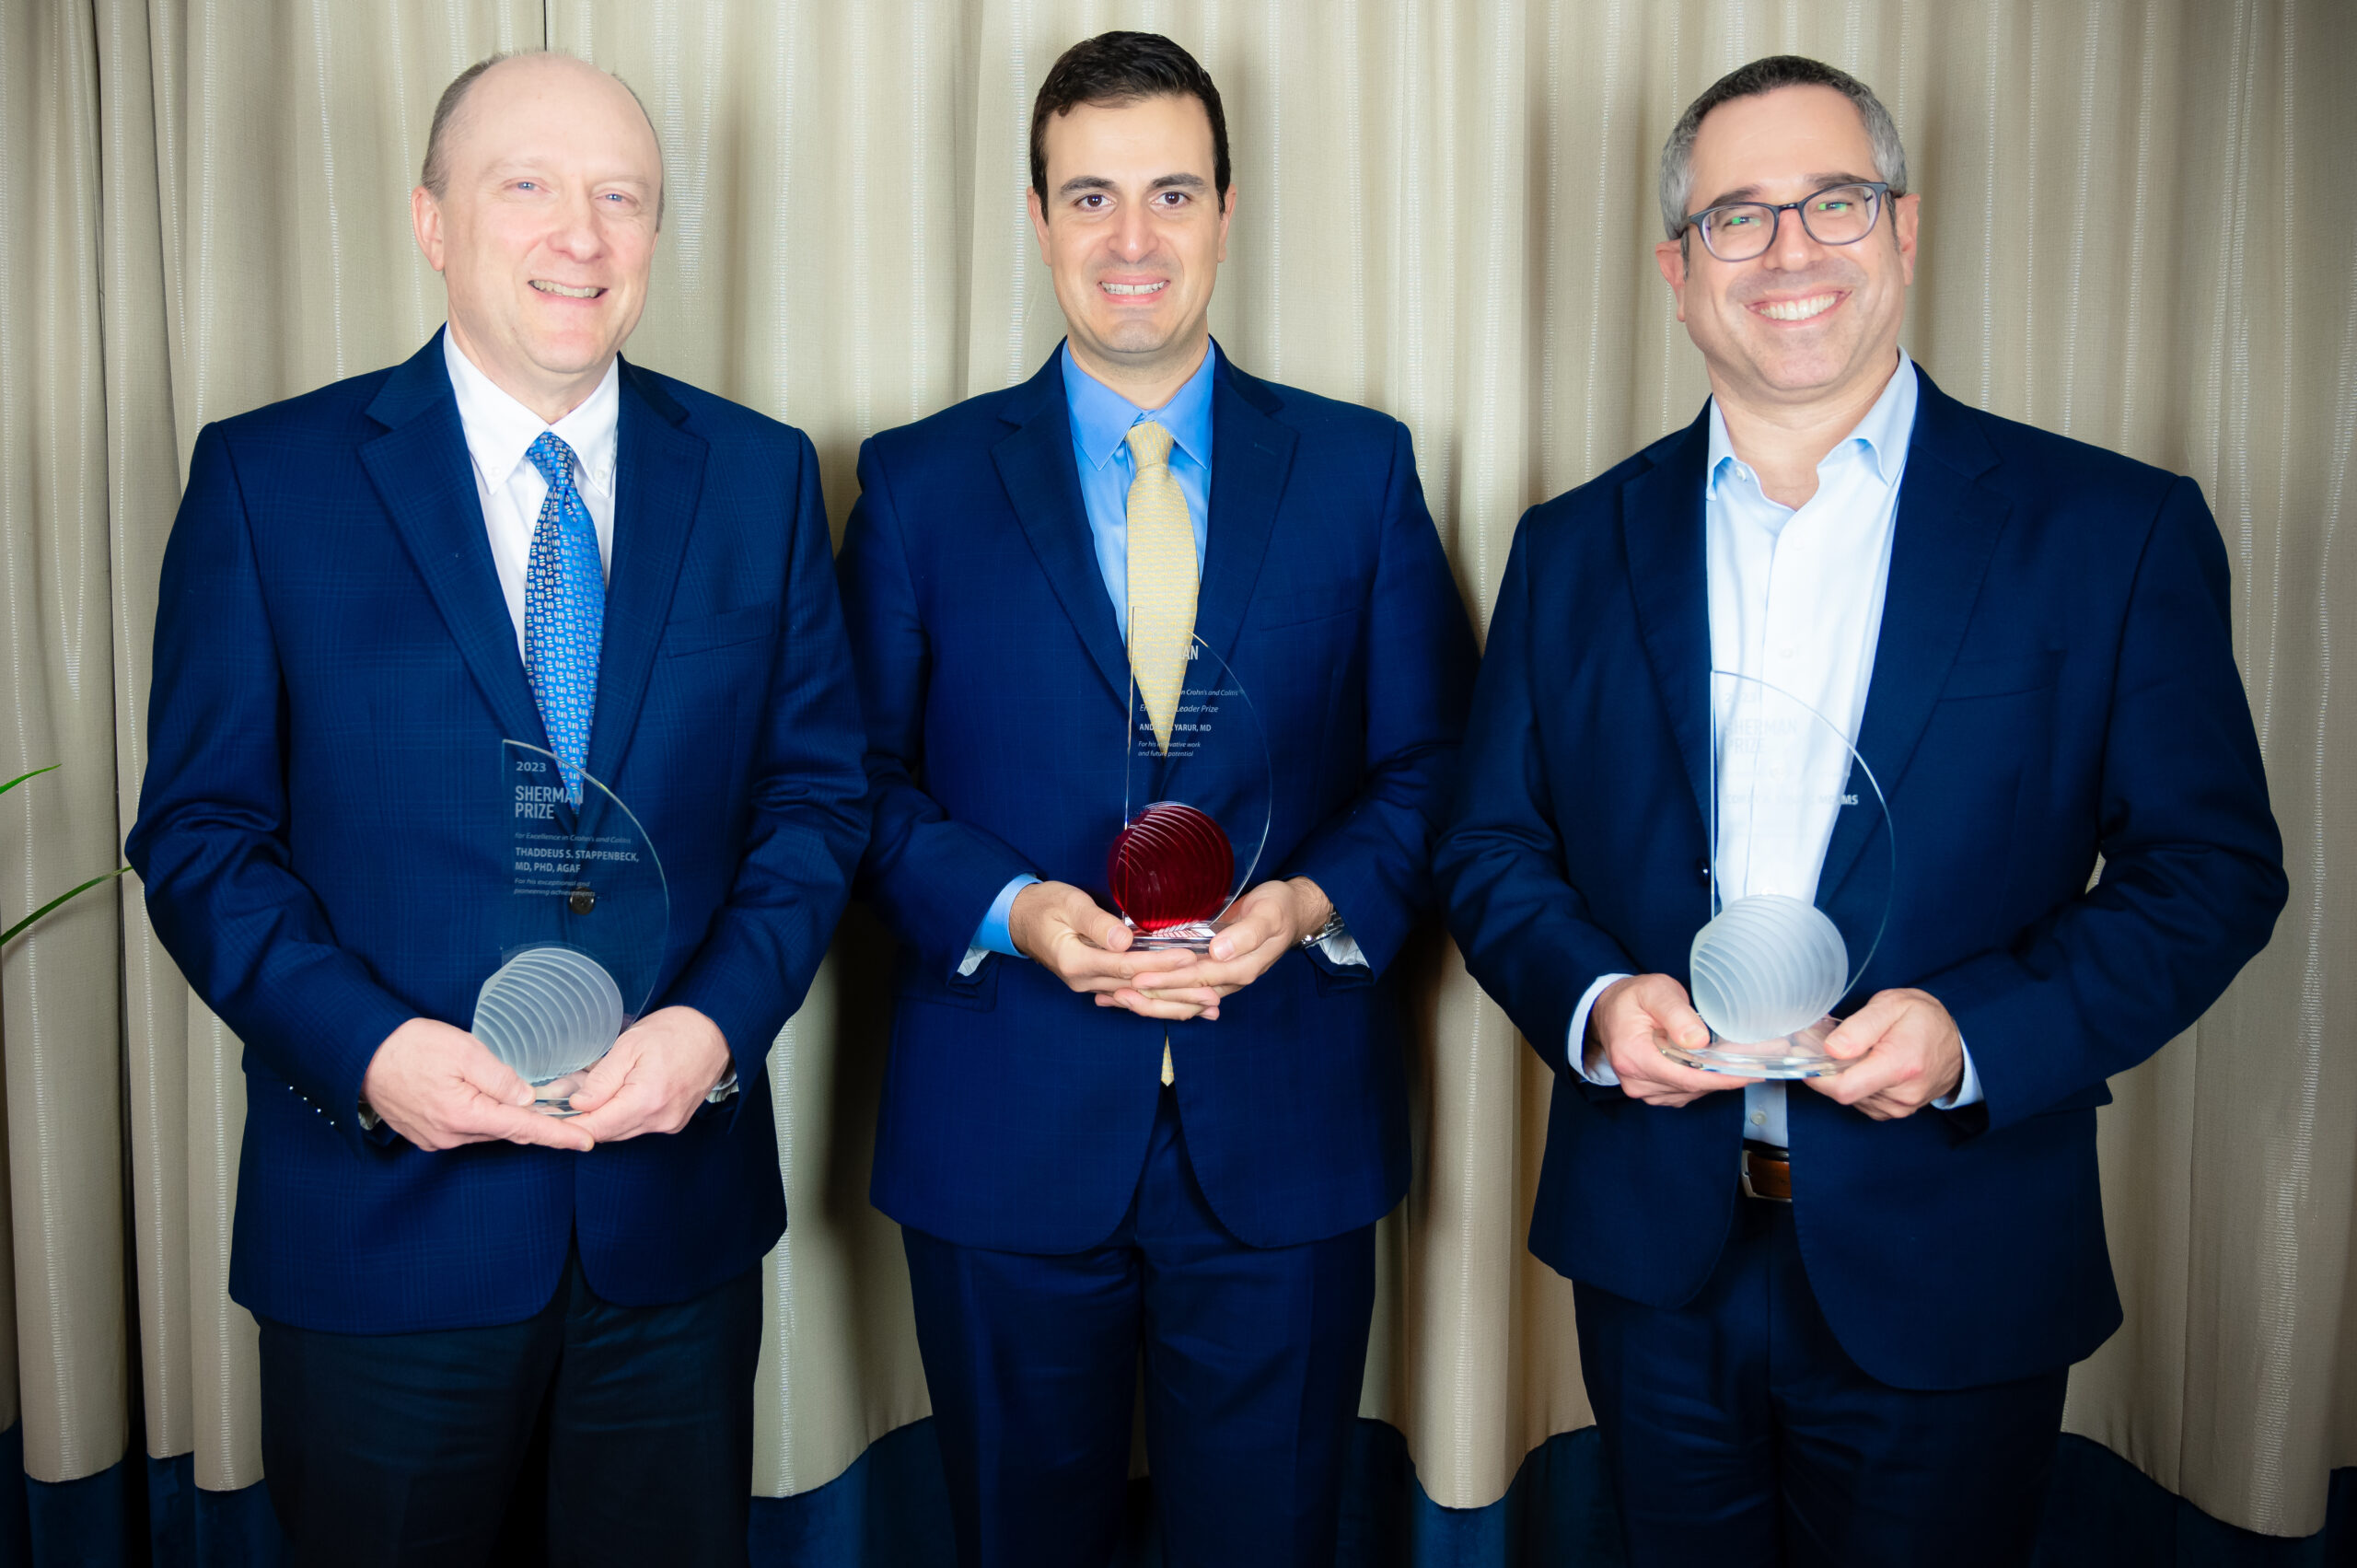 <p>2023 Sherman Prize Recipients: Thaddeus S. Stappenbeck, MD, PhD, Corey A. Siegel, MD, MS, and Andres J. Yarur, MD</p>
